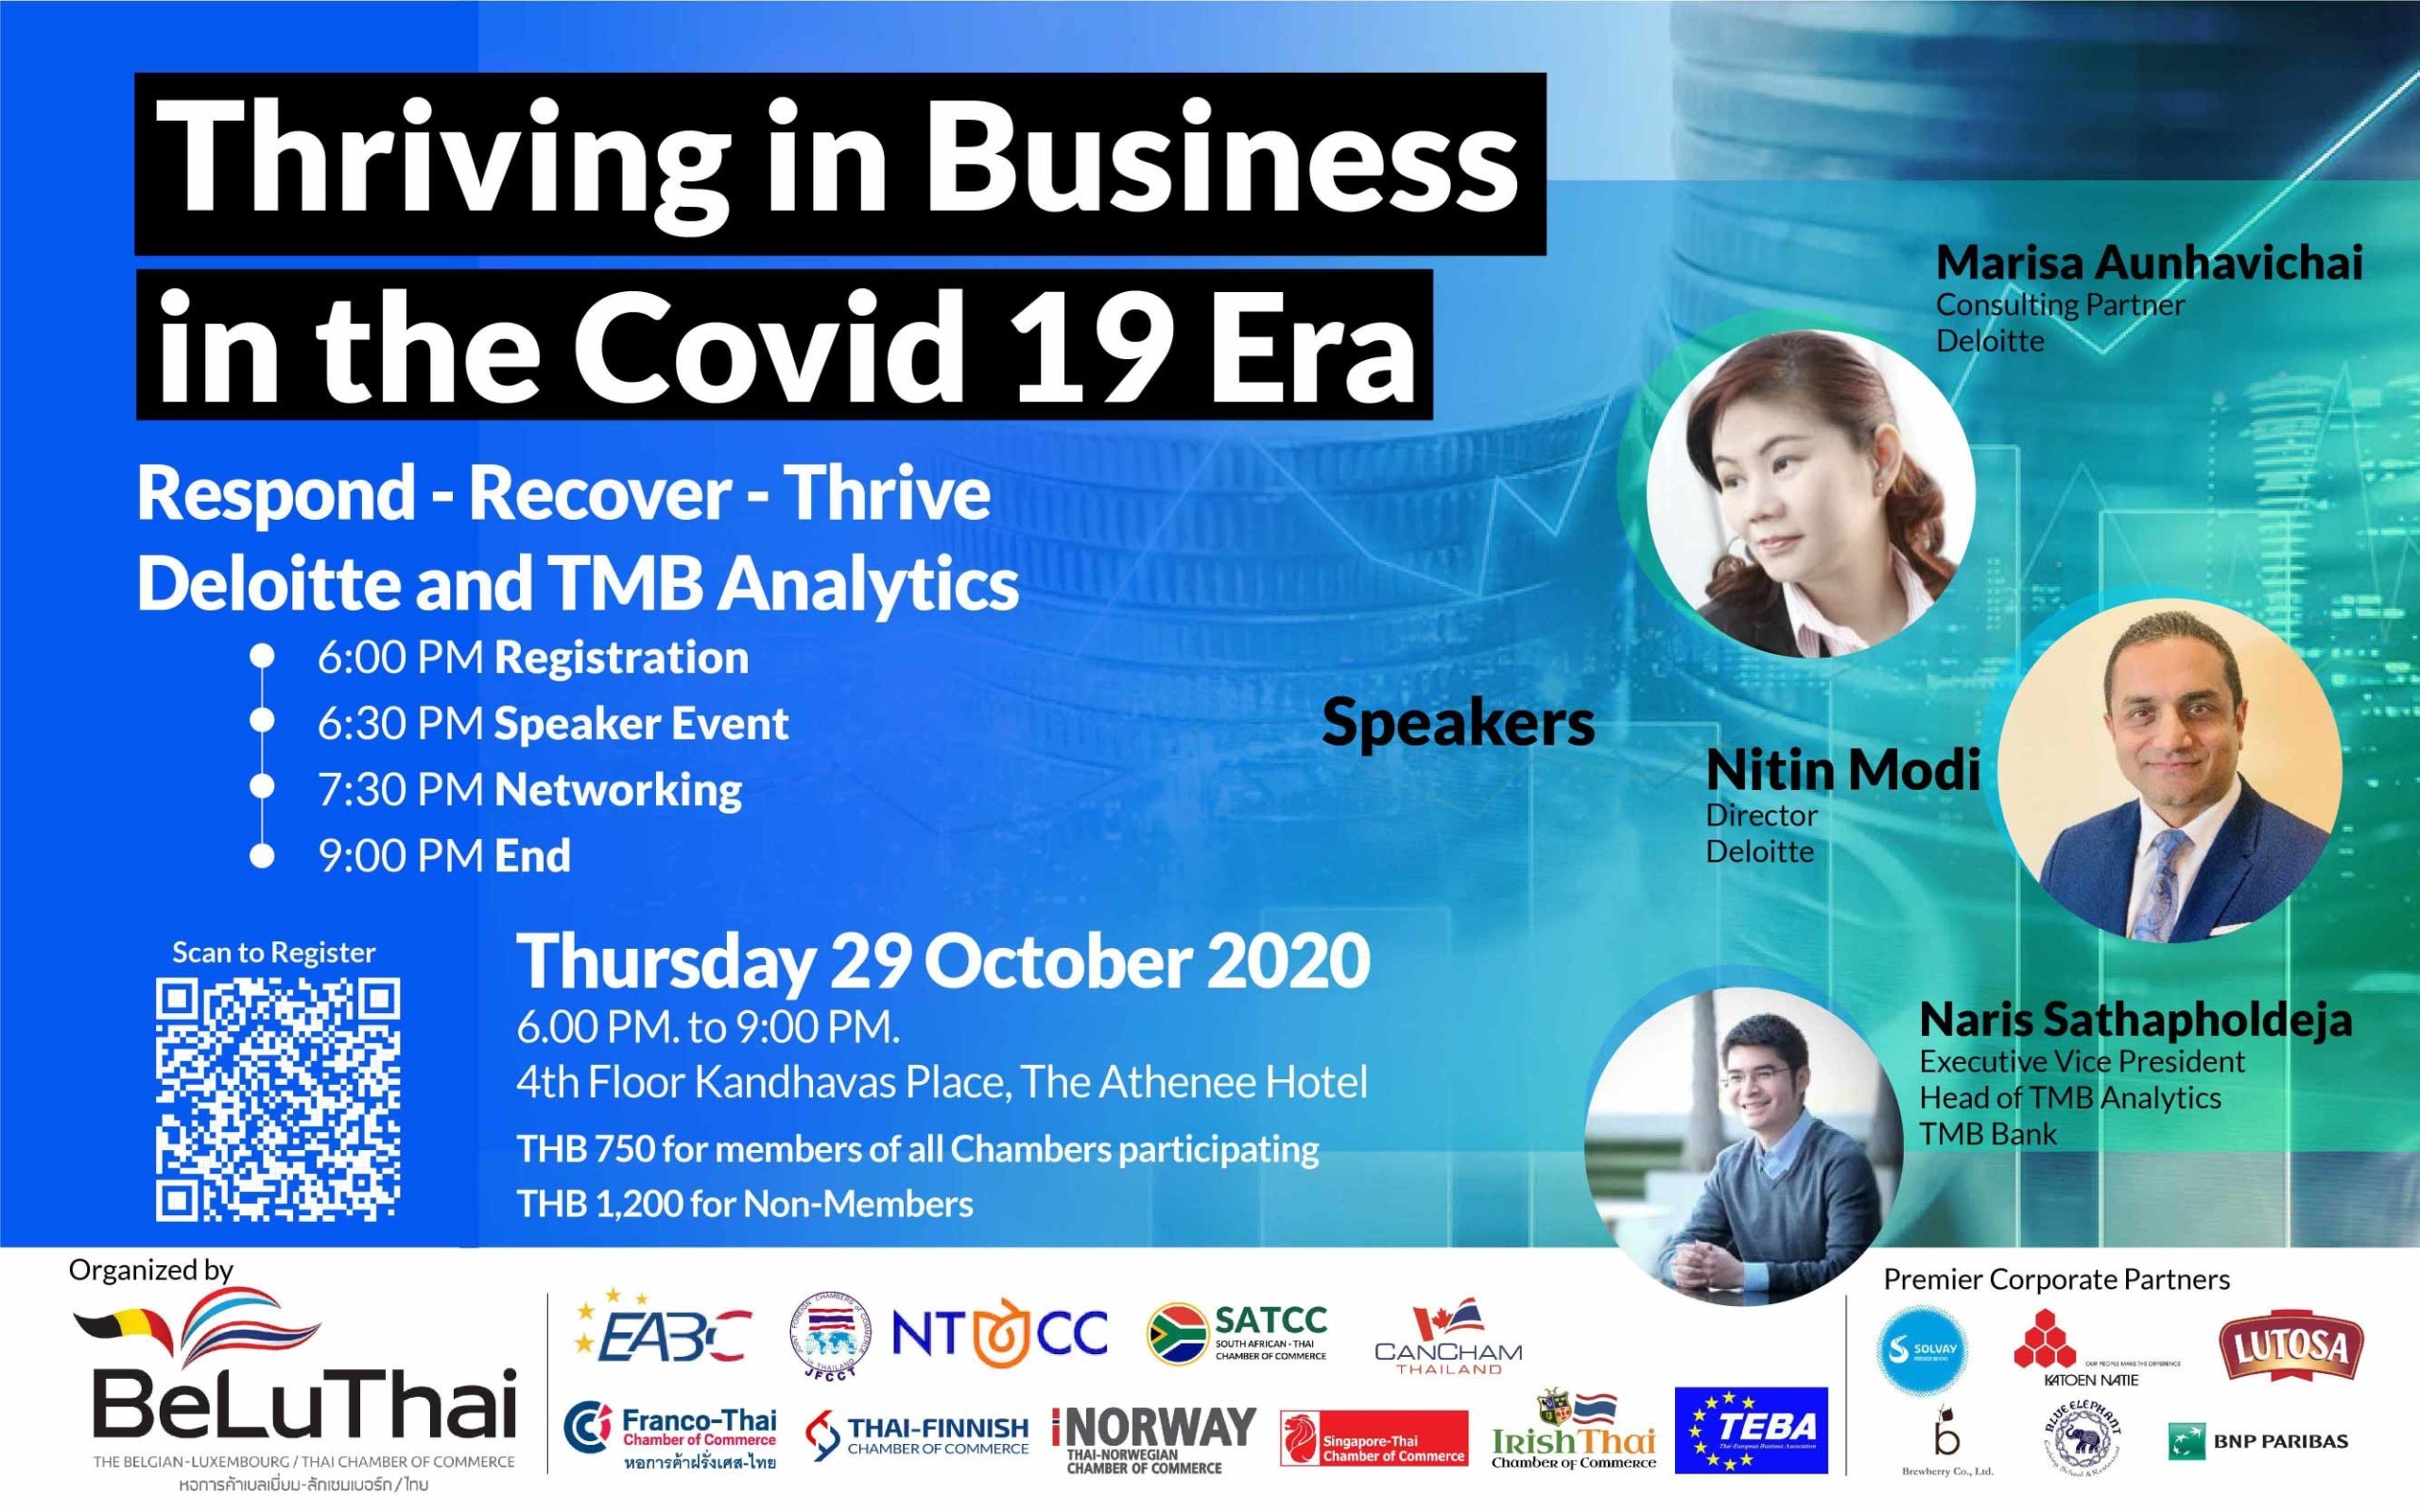 Co-branded event: Thriving in the Covid-19 Era